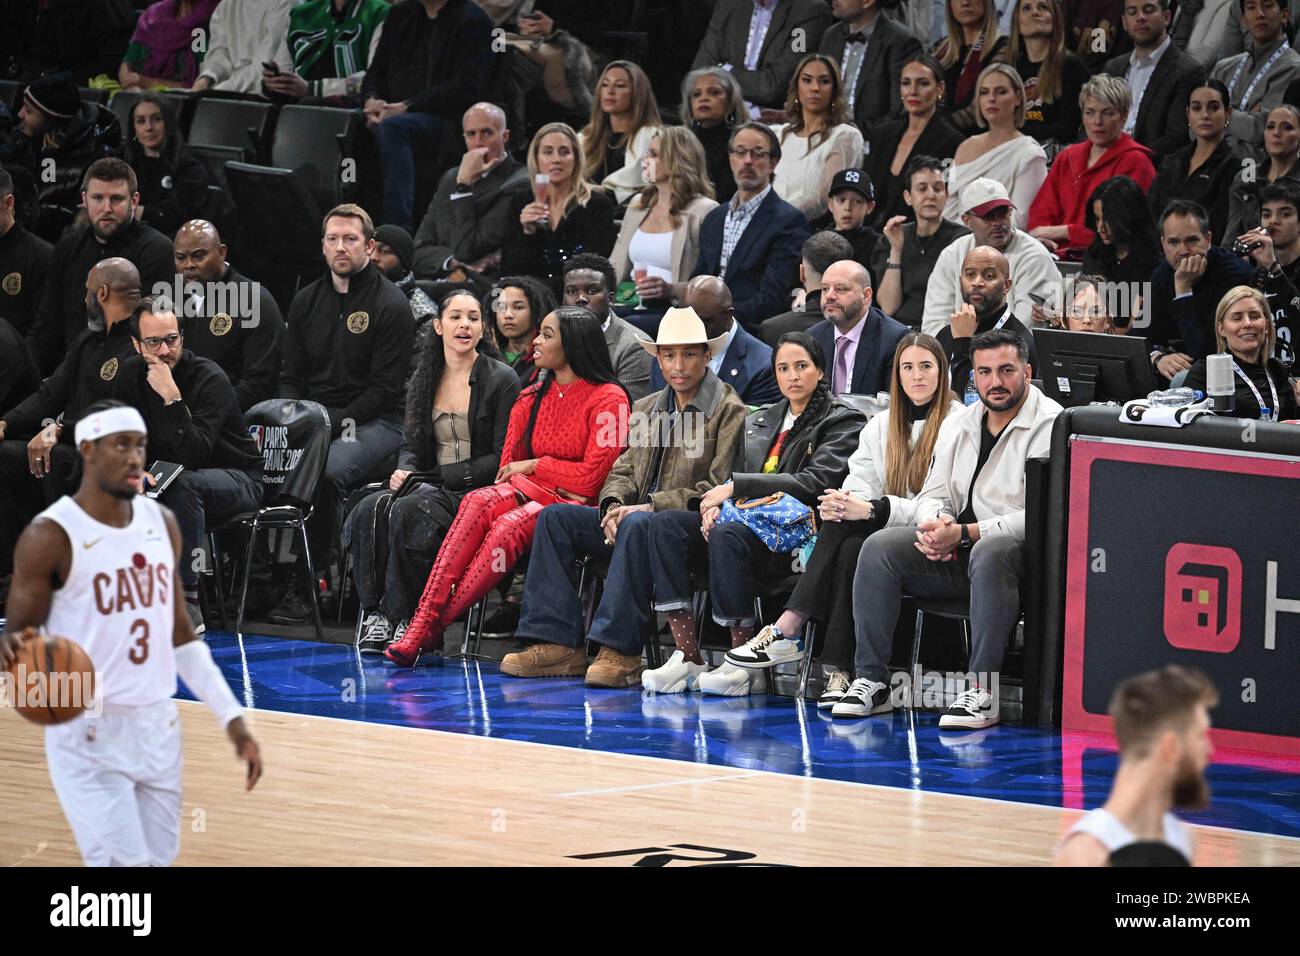 Paris, France. 11th Jan, 2024. Pharrell Williams, Singer-songwriter and music producer during the NBA Paris Game 2024 presented by Revolut featuring the Brooklyn Nets and the Cleveland Cavaliers playing the league's third regular-season game in Paris on January 11, 2023. Photo by Tomas Stevens/ABACAPRESS.COM Credit: Abaca Press/Alamy Live News Stock Photo